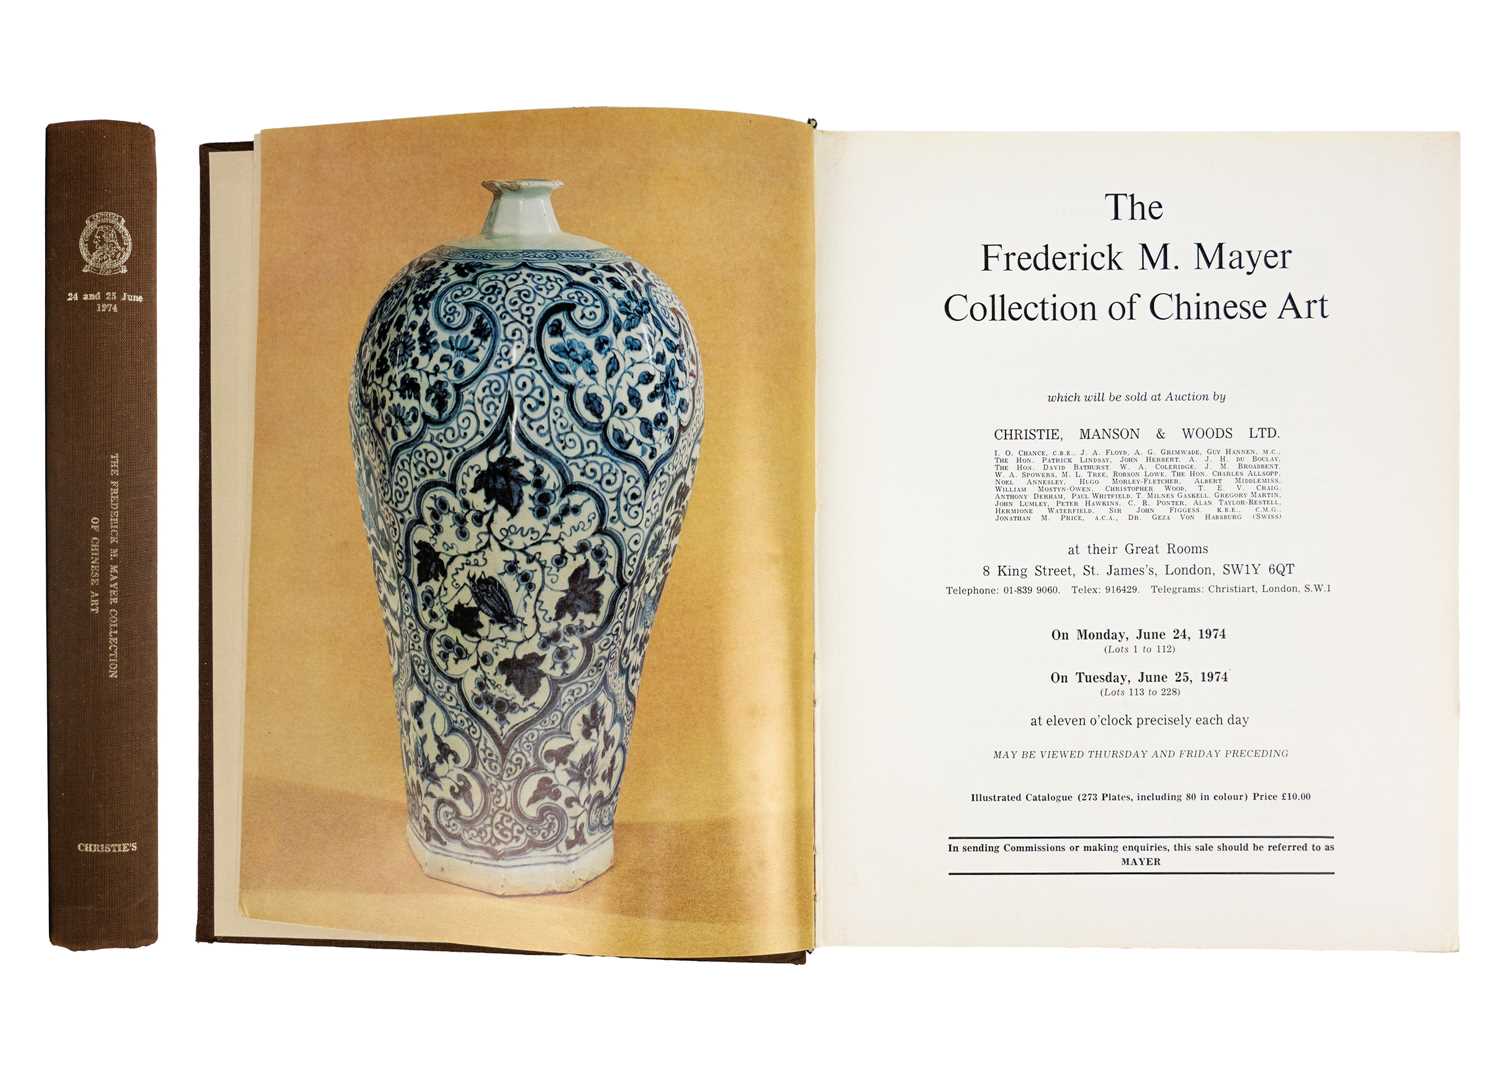 The Frederick M. Mayer Collection of Chinese Art, Christies catalogue, London, 1974.